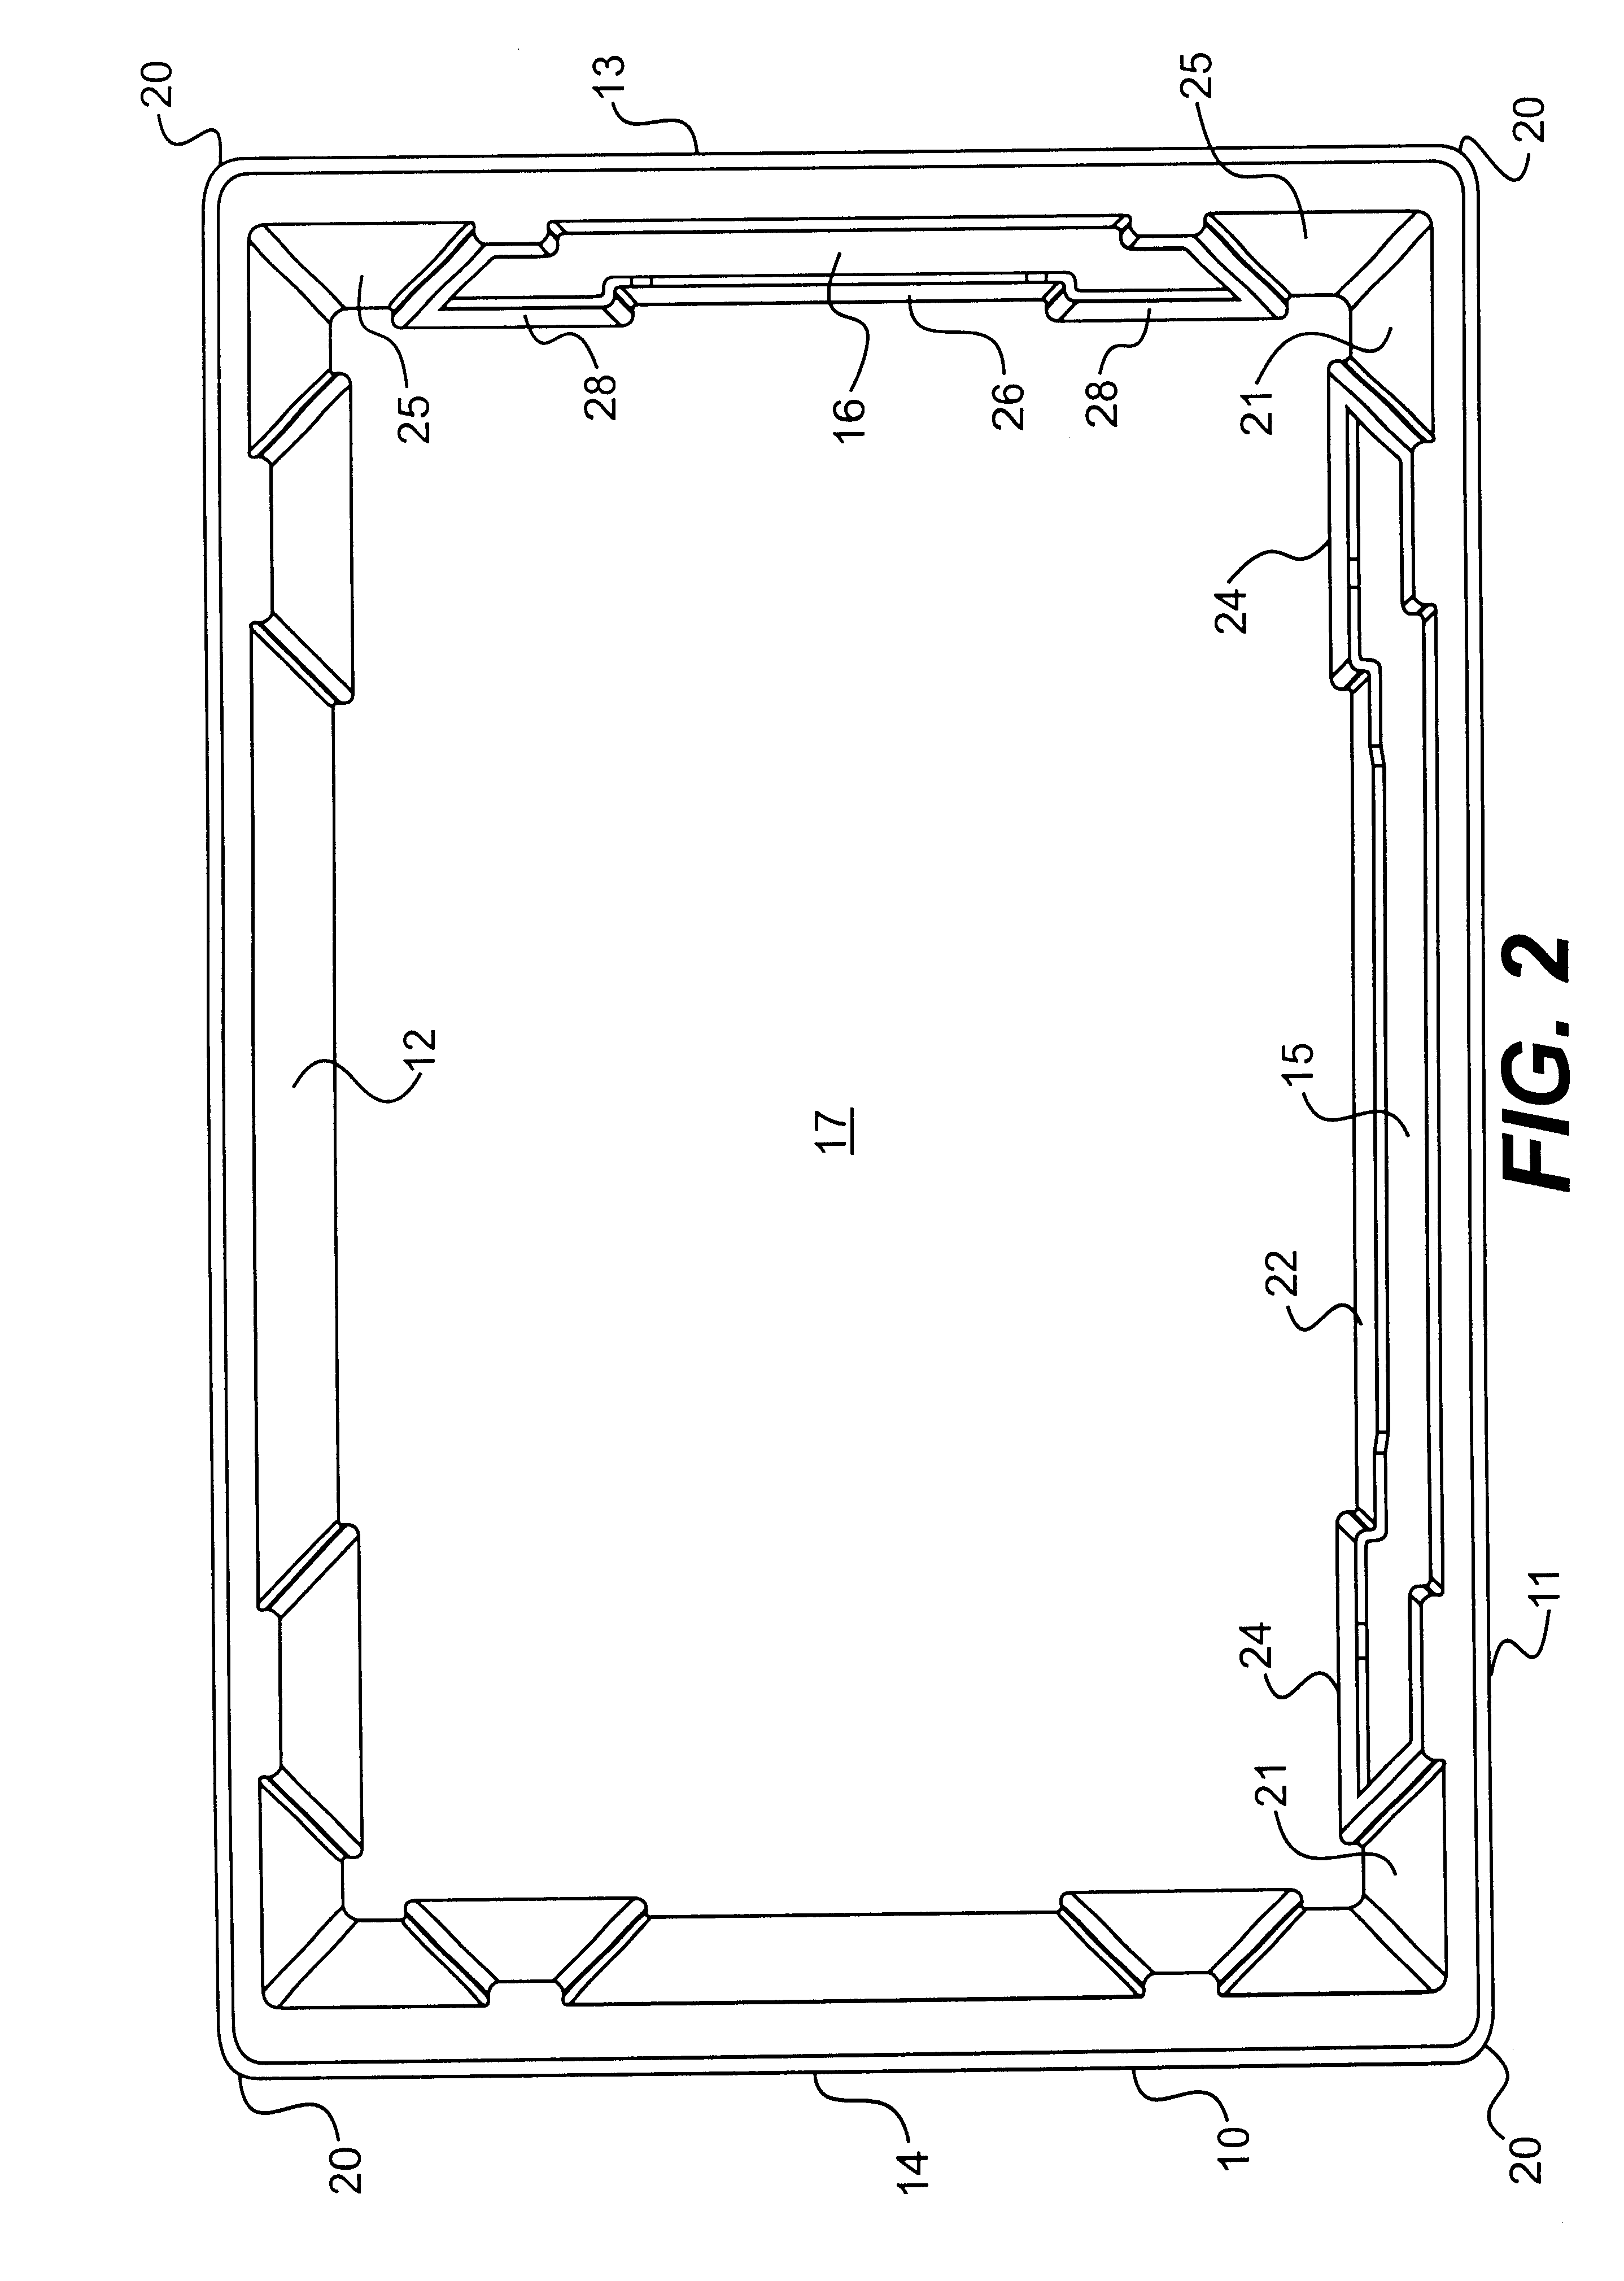 Nestable container with expendable closure panel covering access opening in container wall